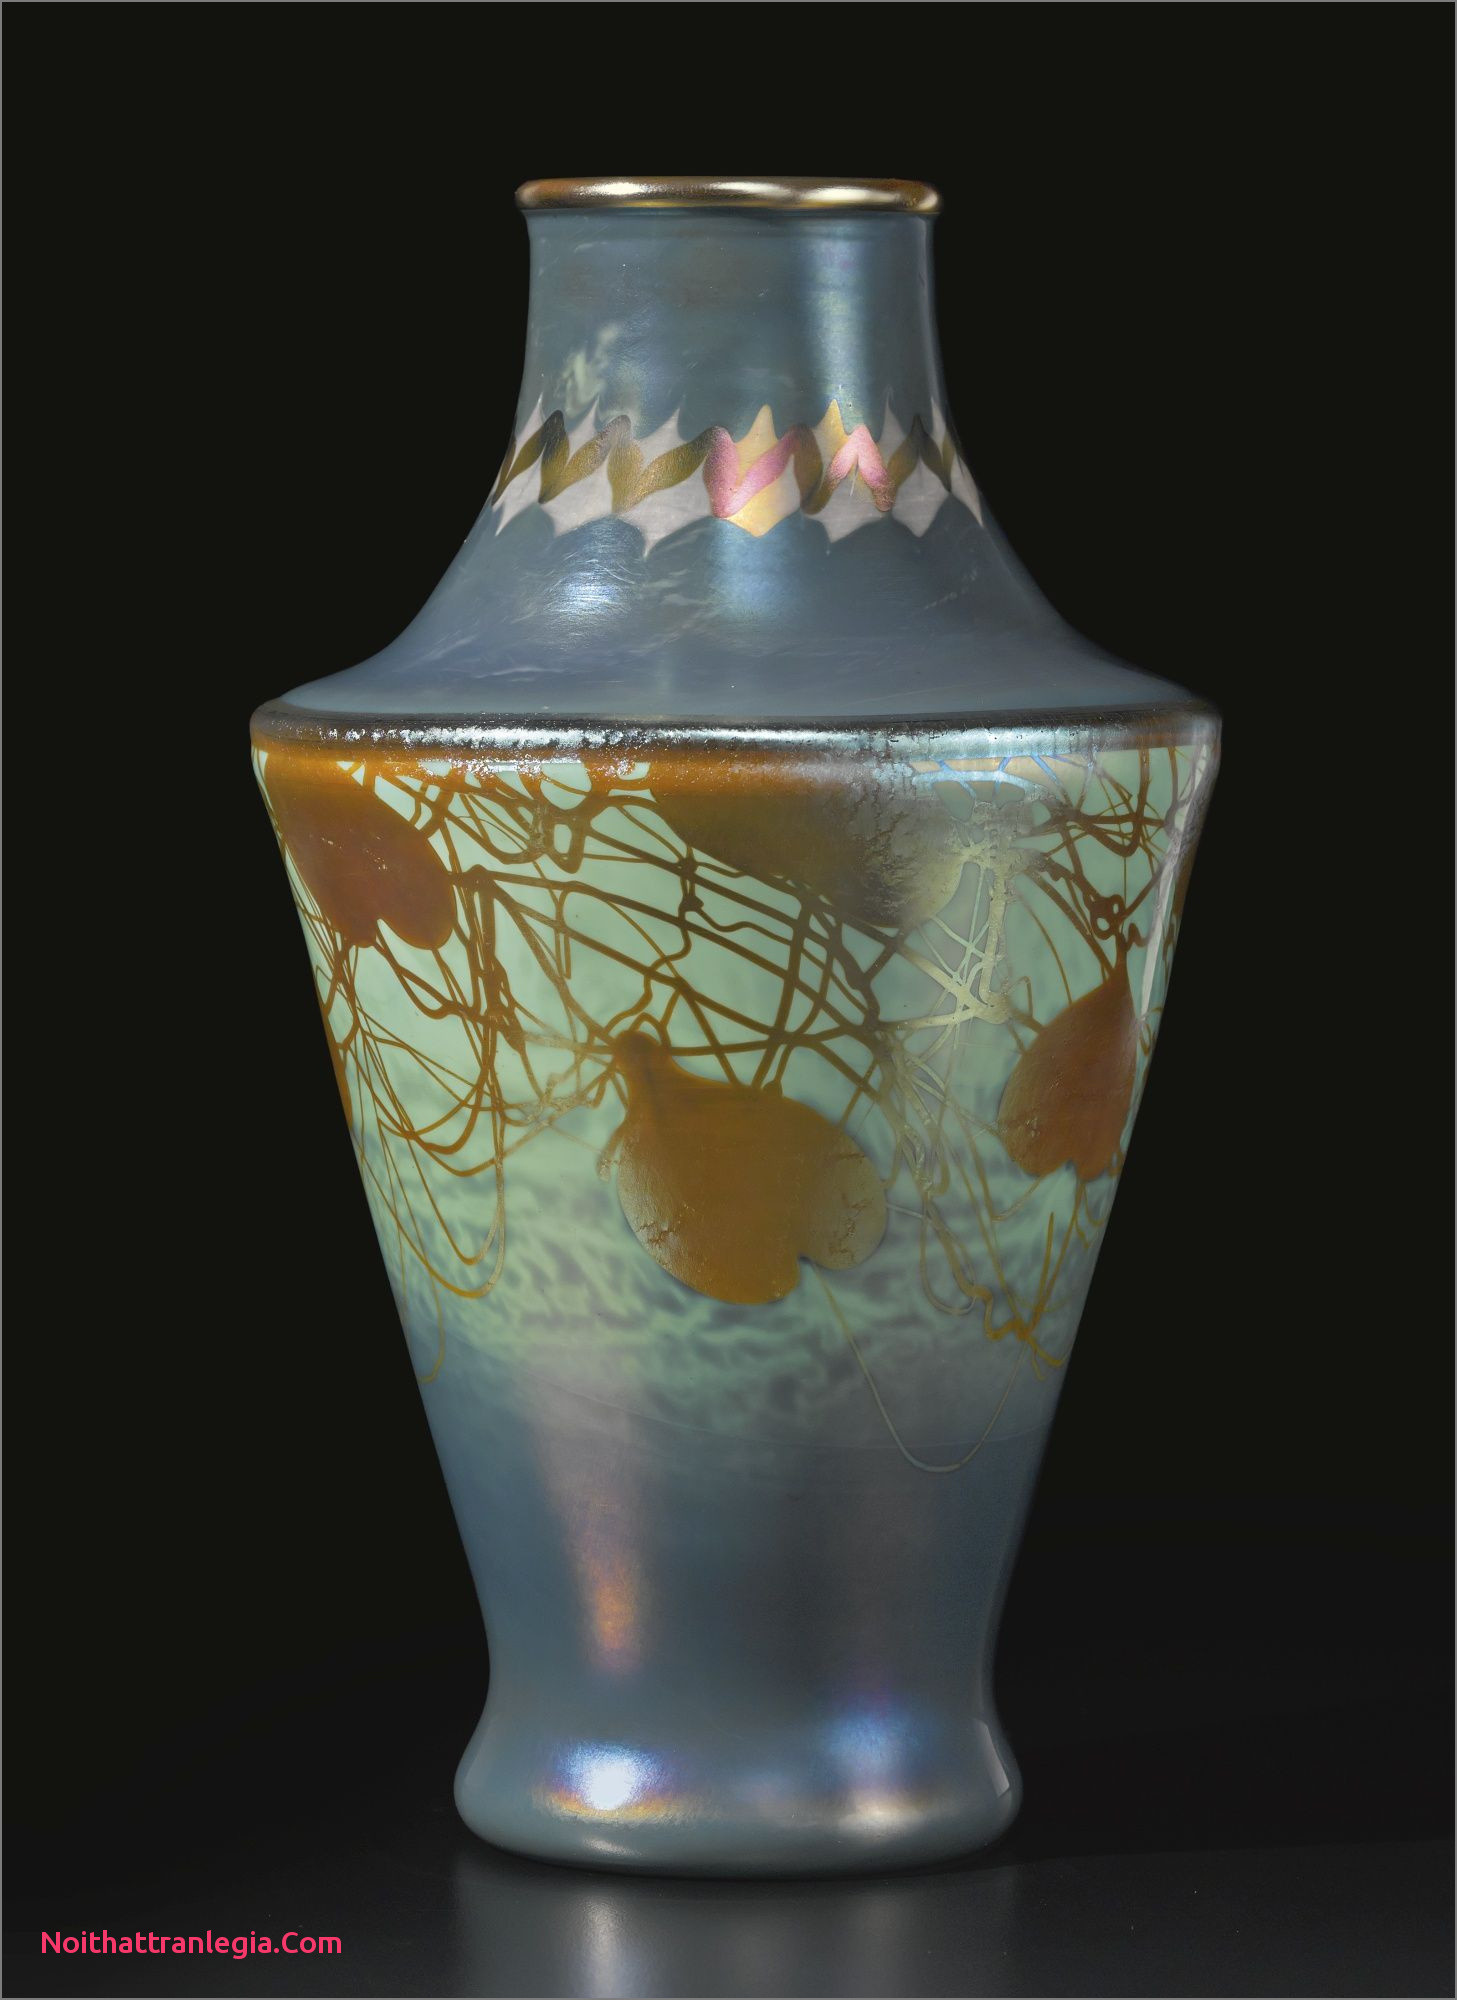 30 attractive Sterling Silver Vase Engraved 2024 free download sterling silver vase engraved of 20 cut glass antique vase noithattranlegia vases design with regard to steuben glass works a rare tyrian vase engraved with indistinct mark aurene glass with